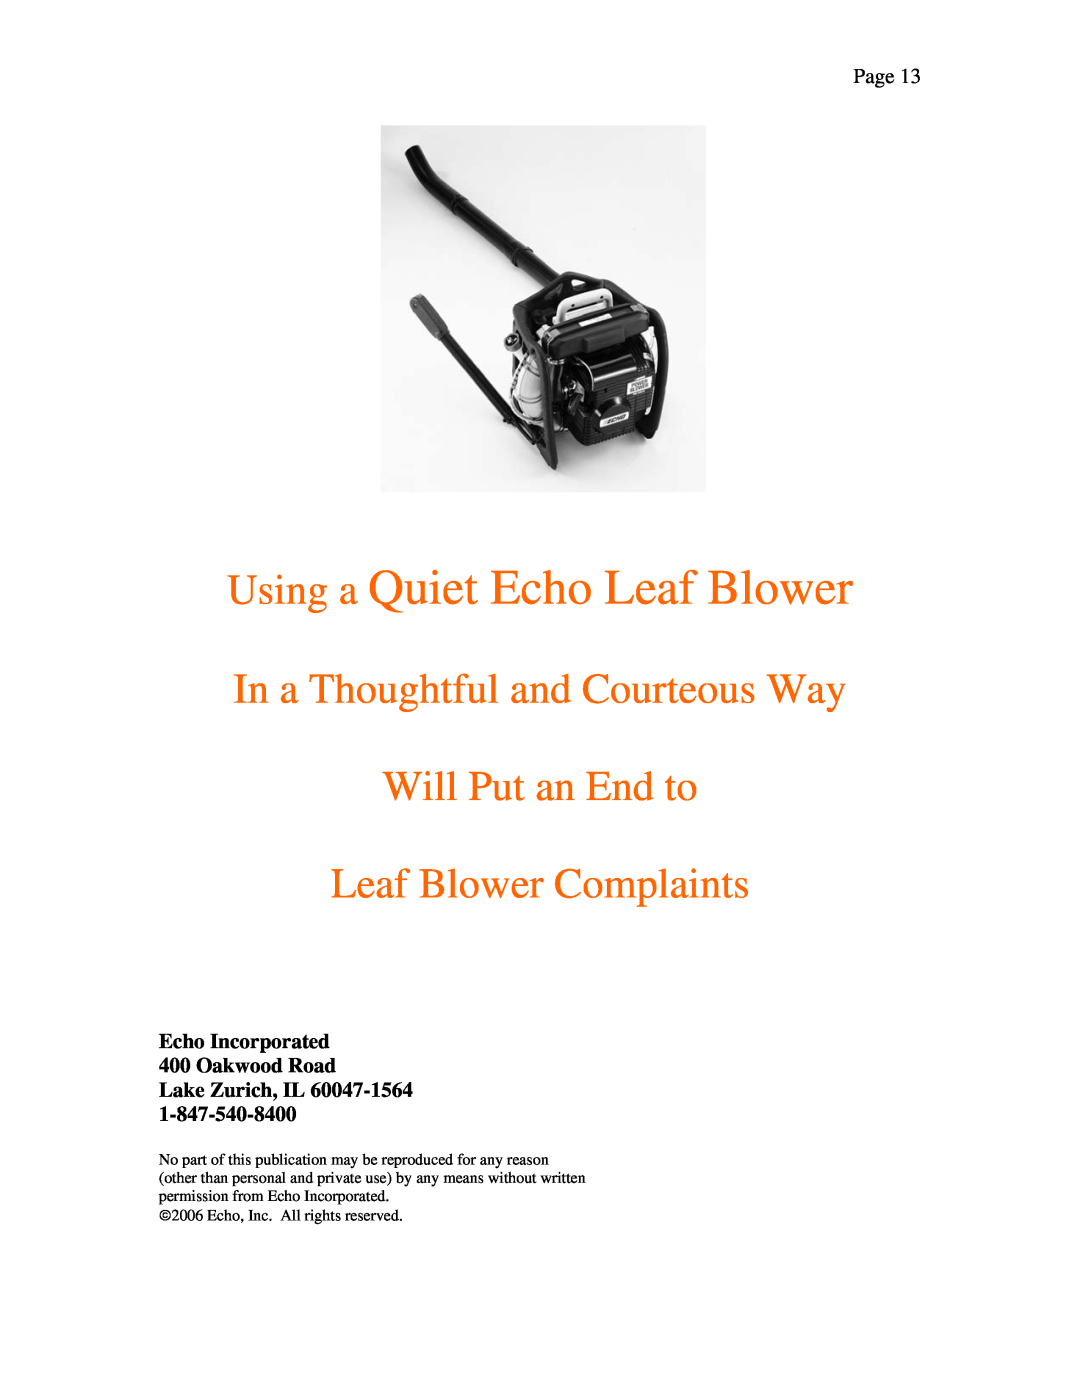 Echo LEAF BLOWER Using a Quiet Echo Leaf Blower, In a Thoughtful and Courteous Way, Echo Incorporated 400 Oakwood Road 